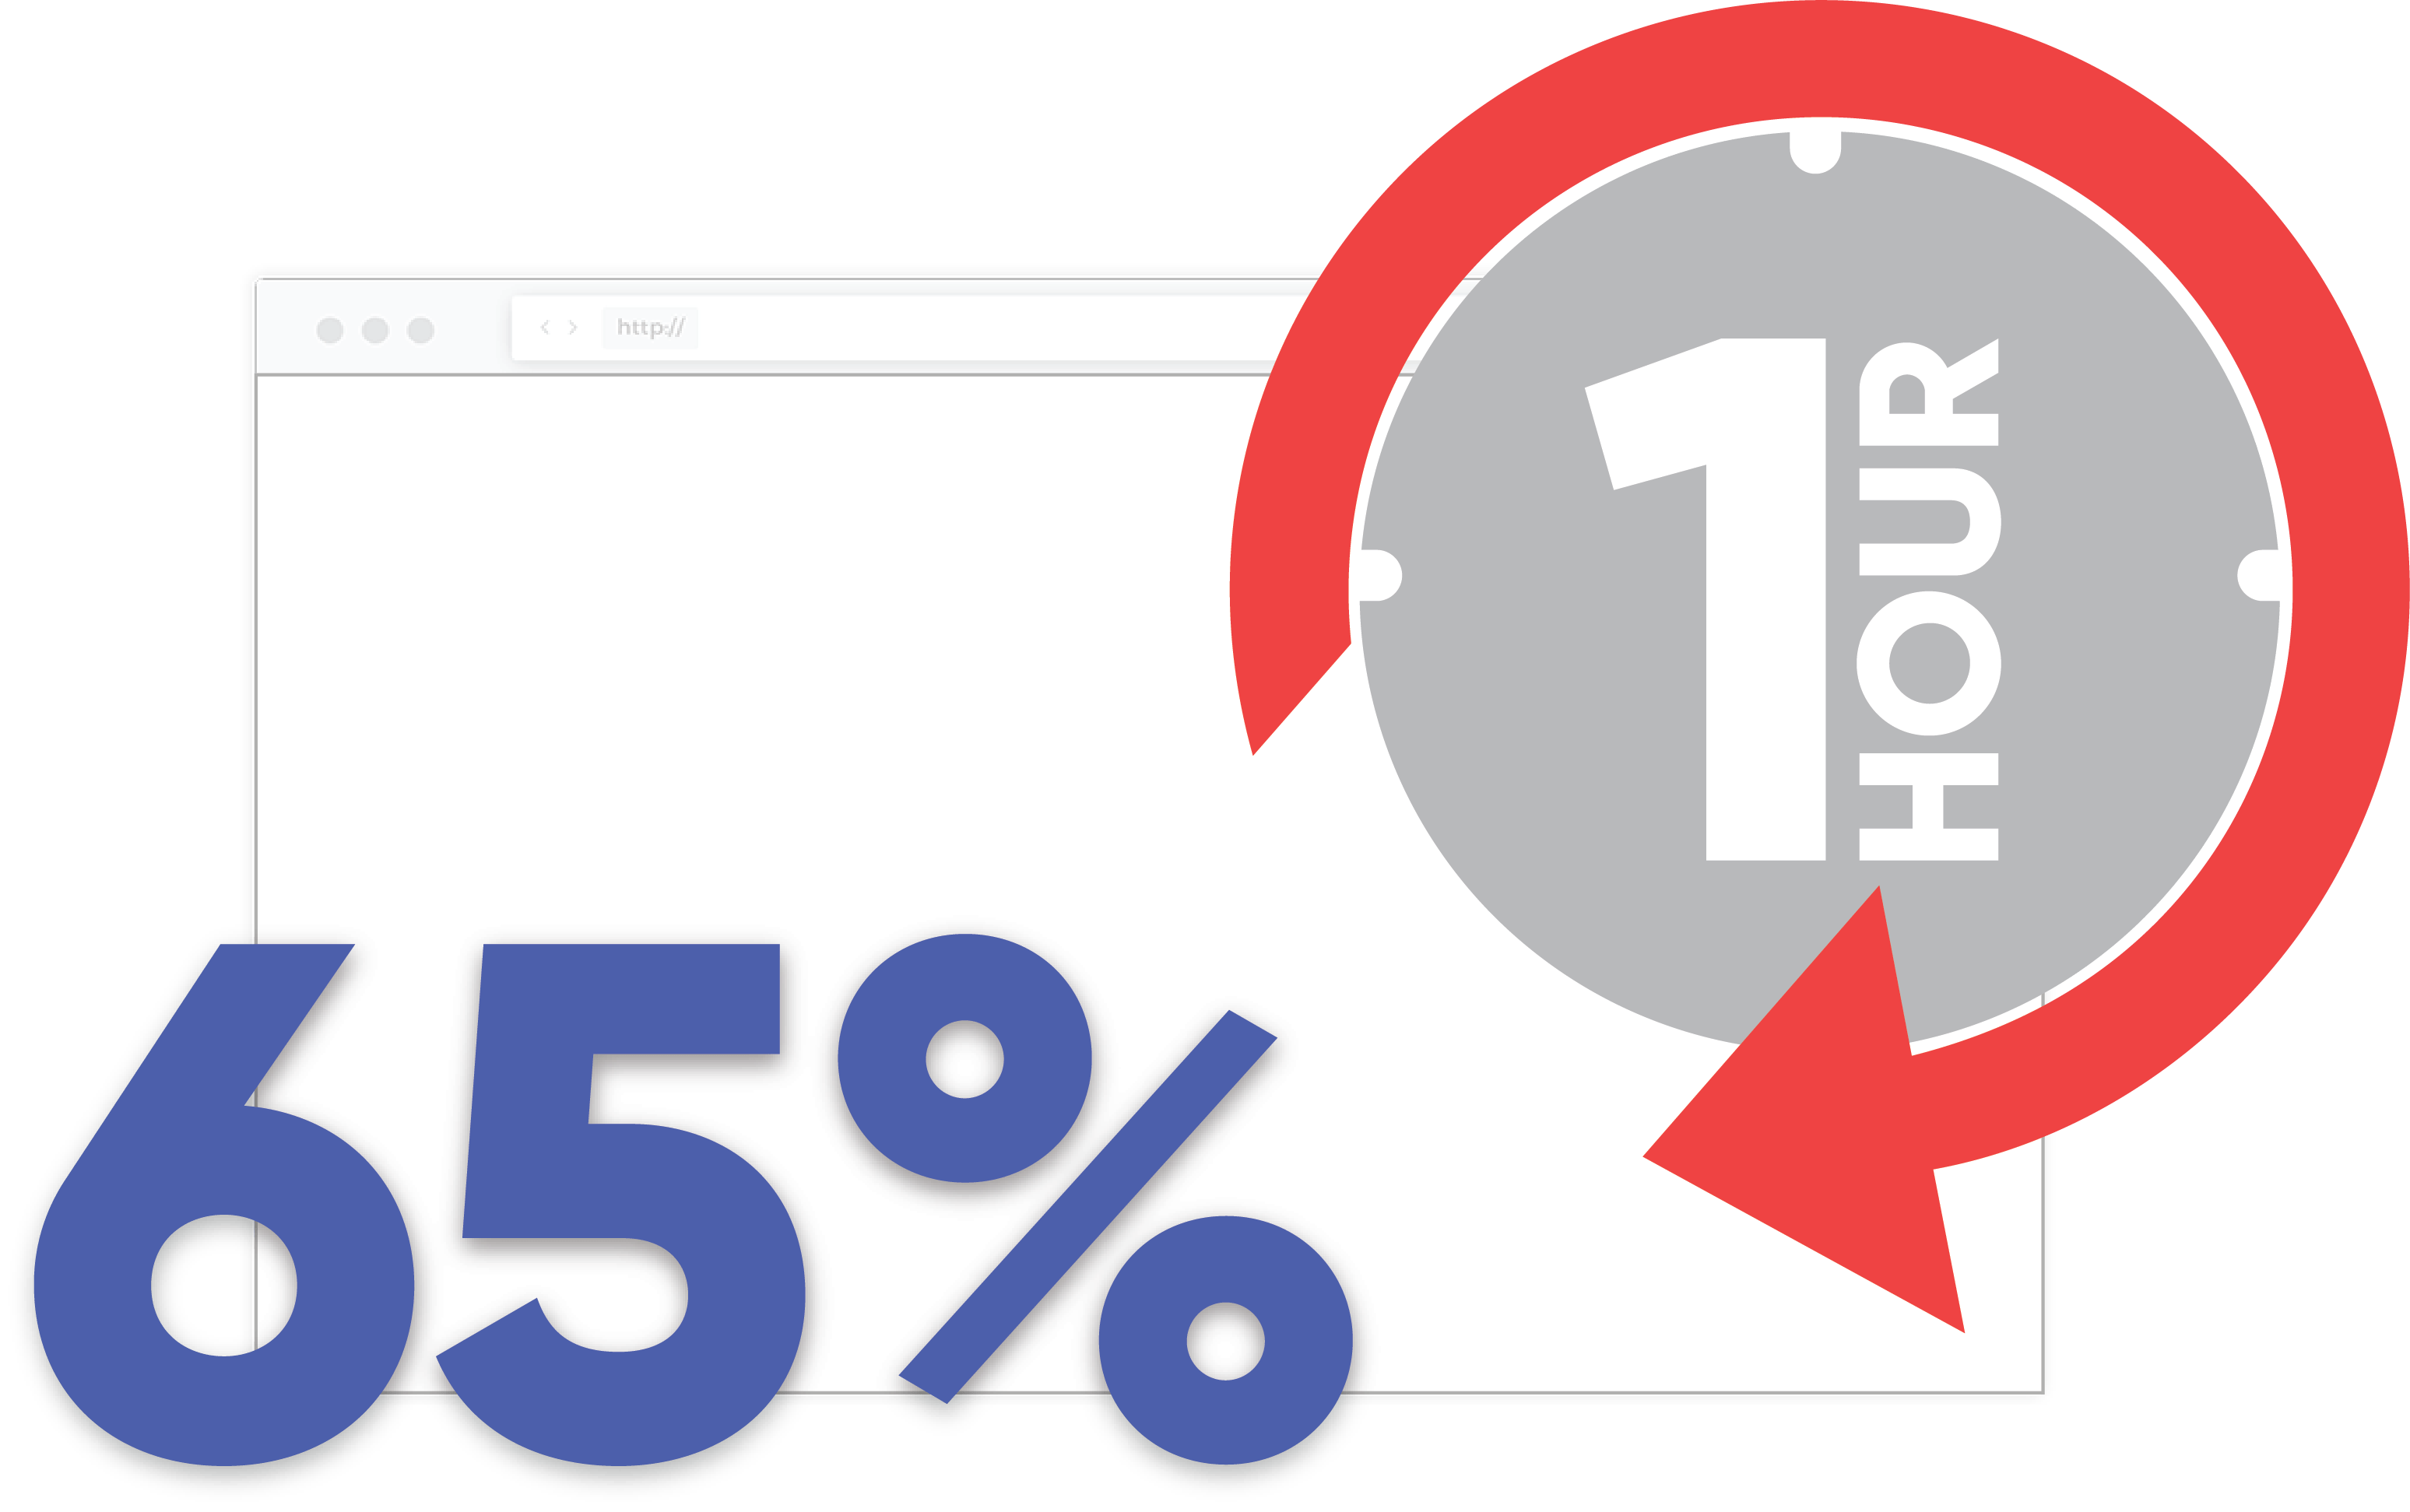 65% of organizations need over an hour to fix a website